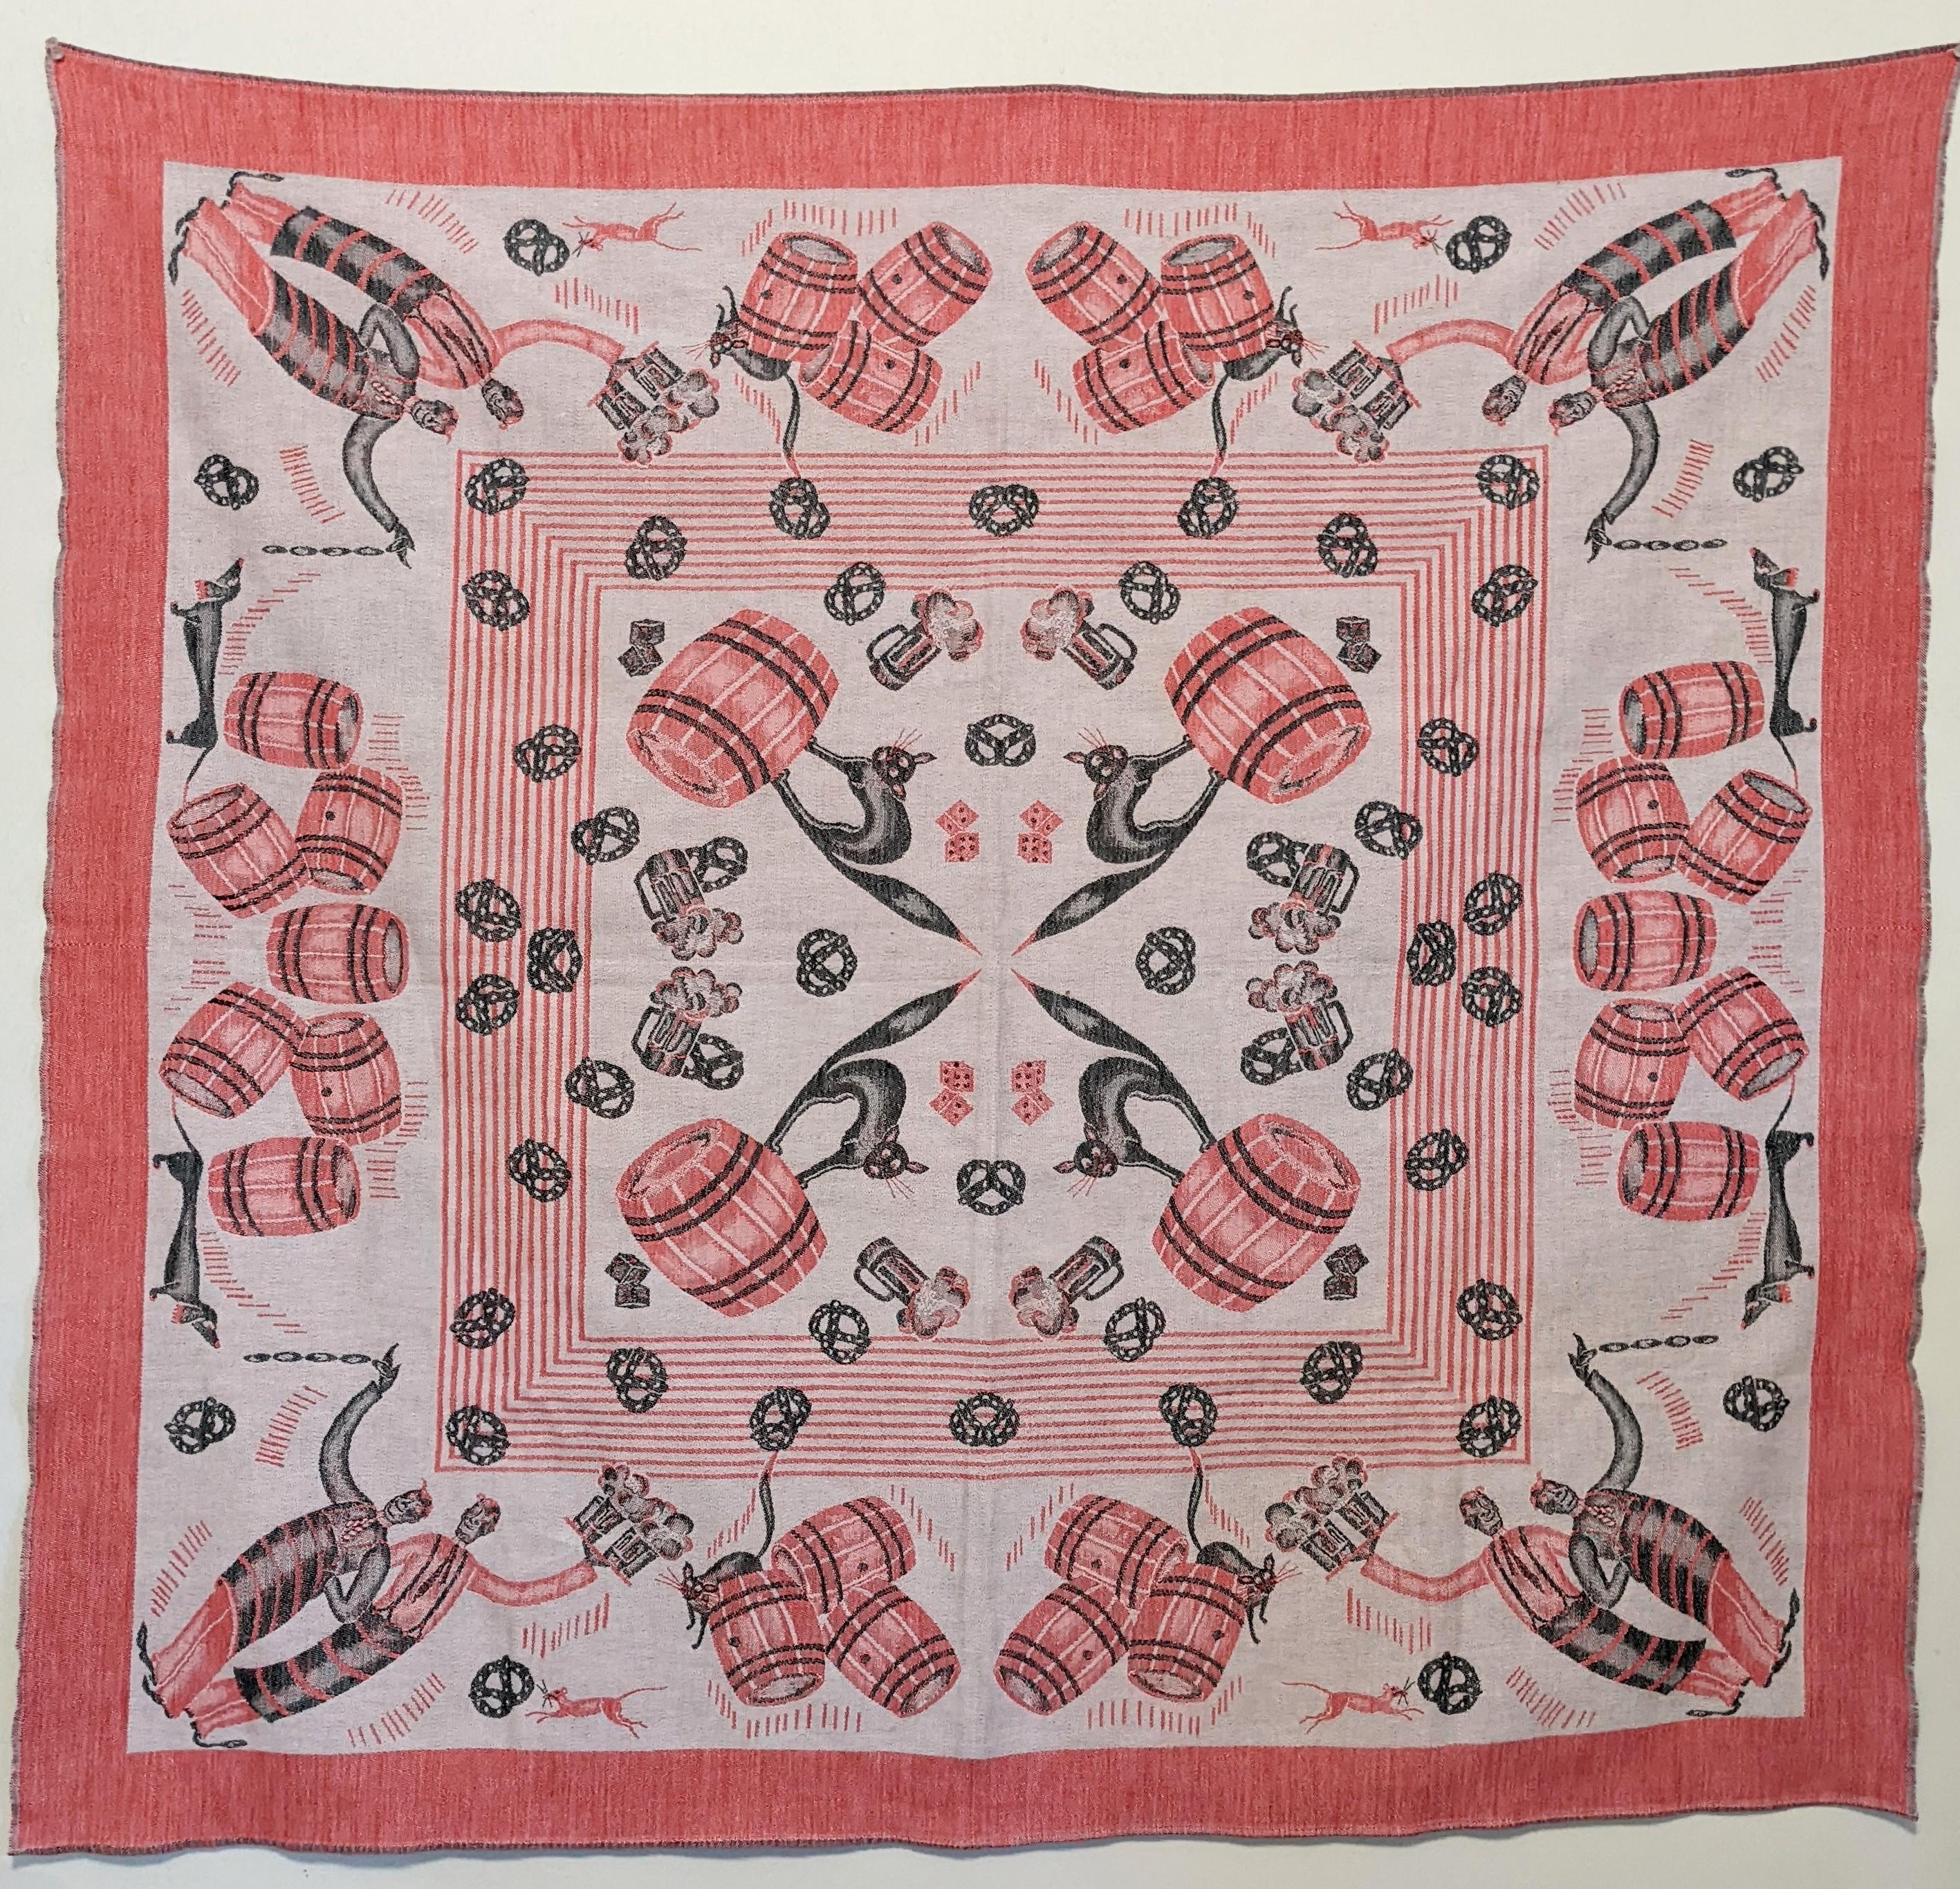 Charming and unusual square figural cotton jacquard cloth from the 1930's depicting barrels of liquor, bartenders, beer mugs, cats, mice and general Prohibition style Bar shenanigans. Would work beautifully as a framed Folk Art.
Color is vibrant